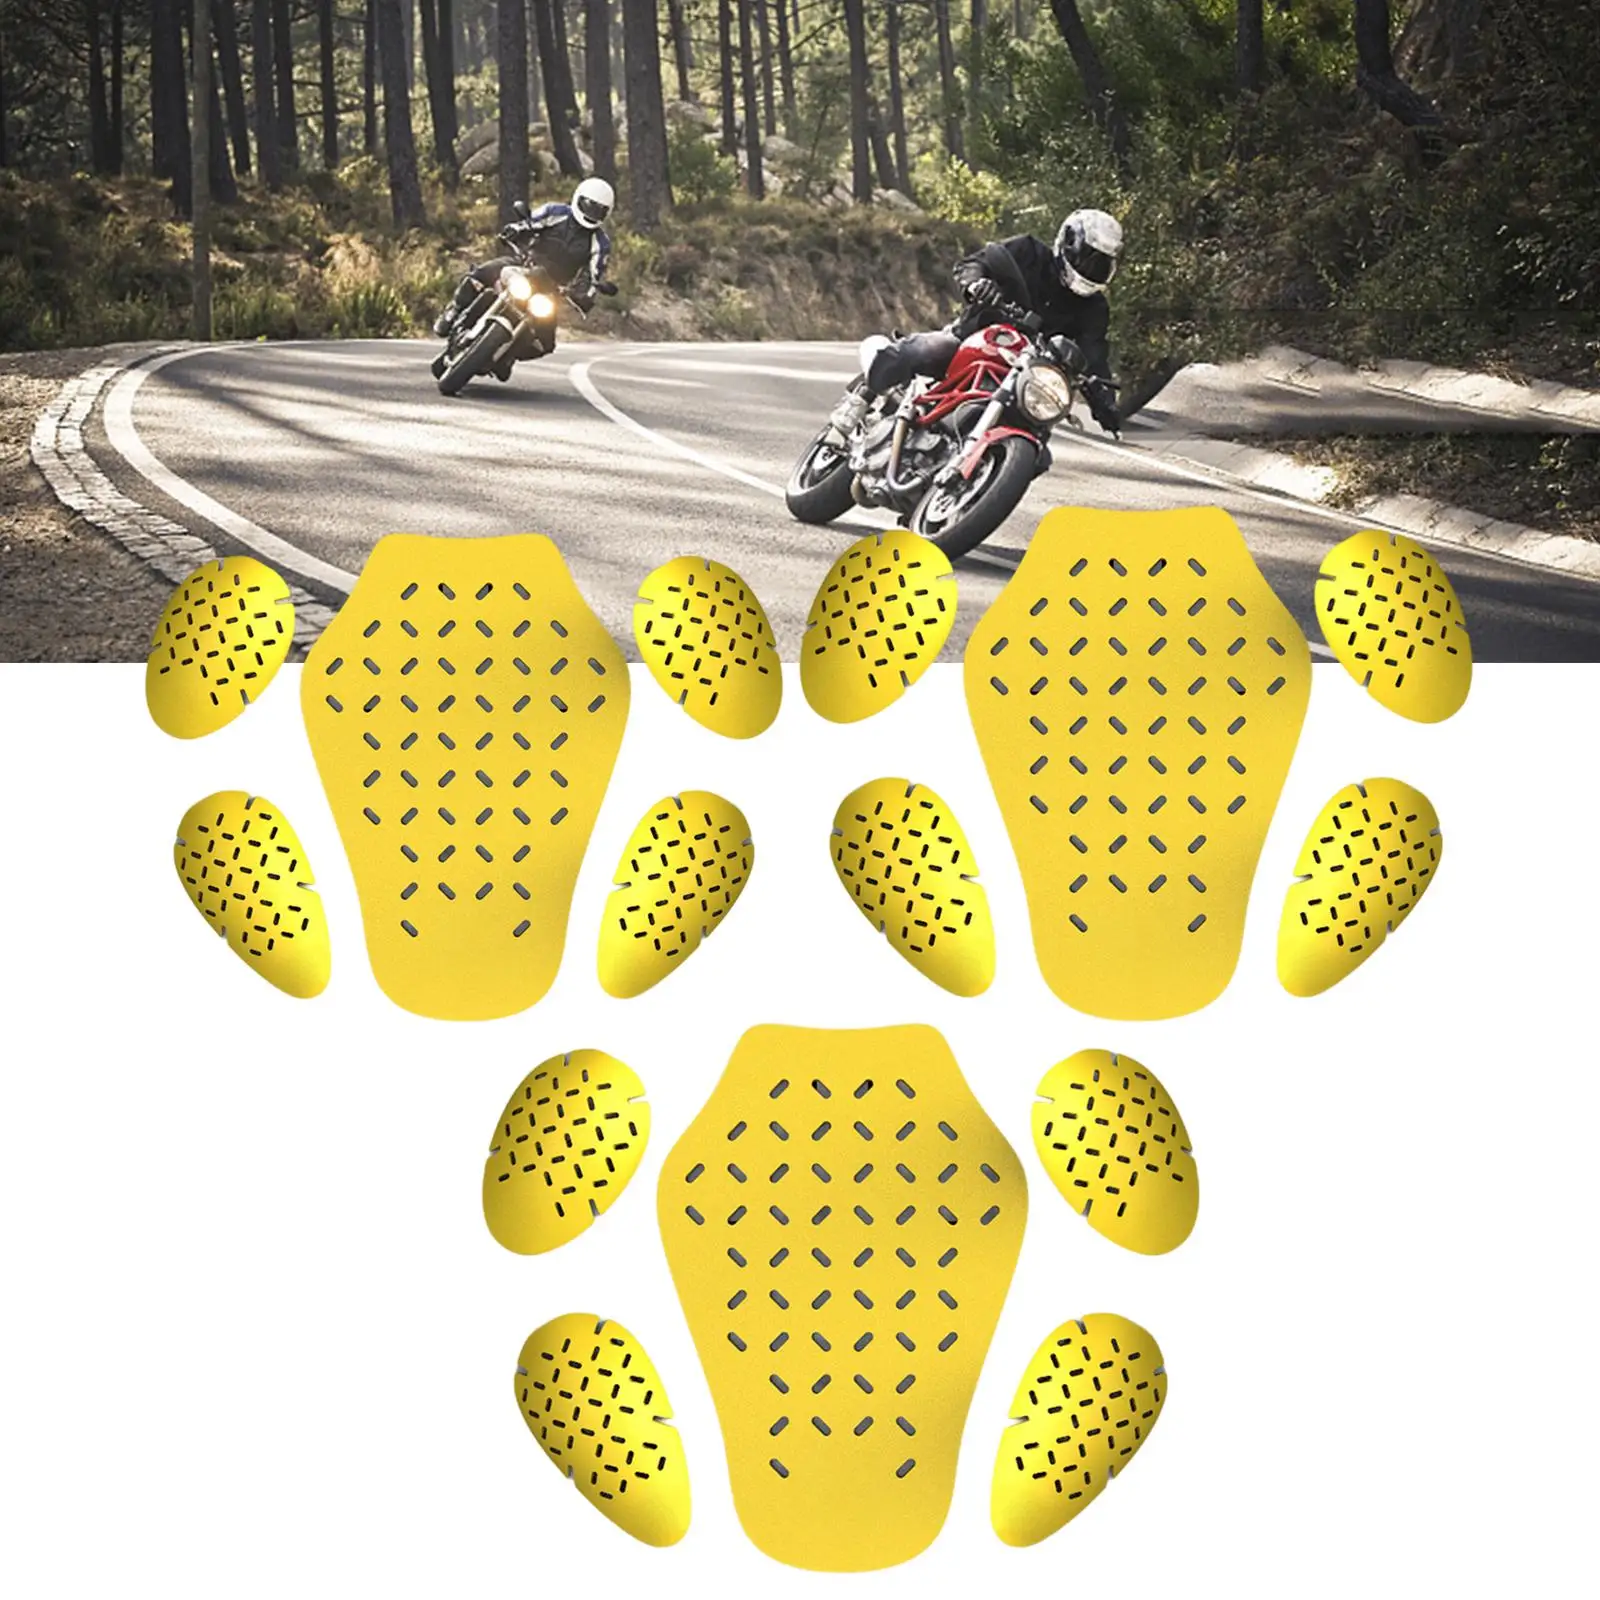 5 Pieces Motorbike Insert Pads EVA Body for Cycling Riding